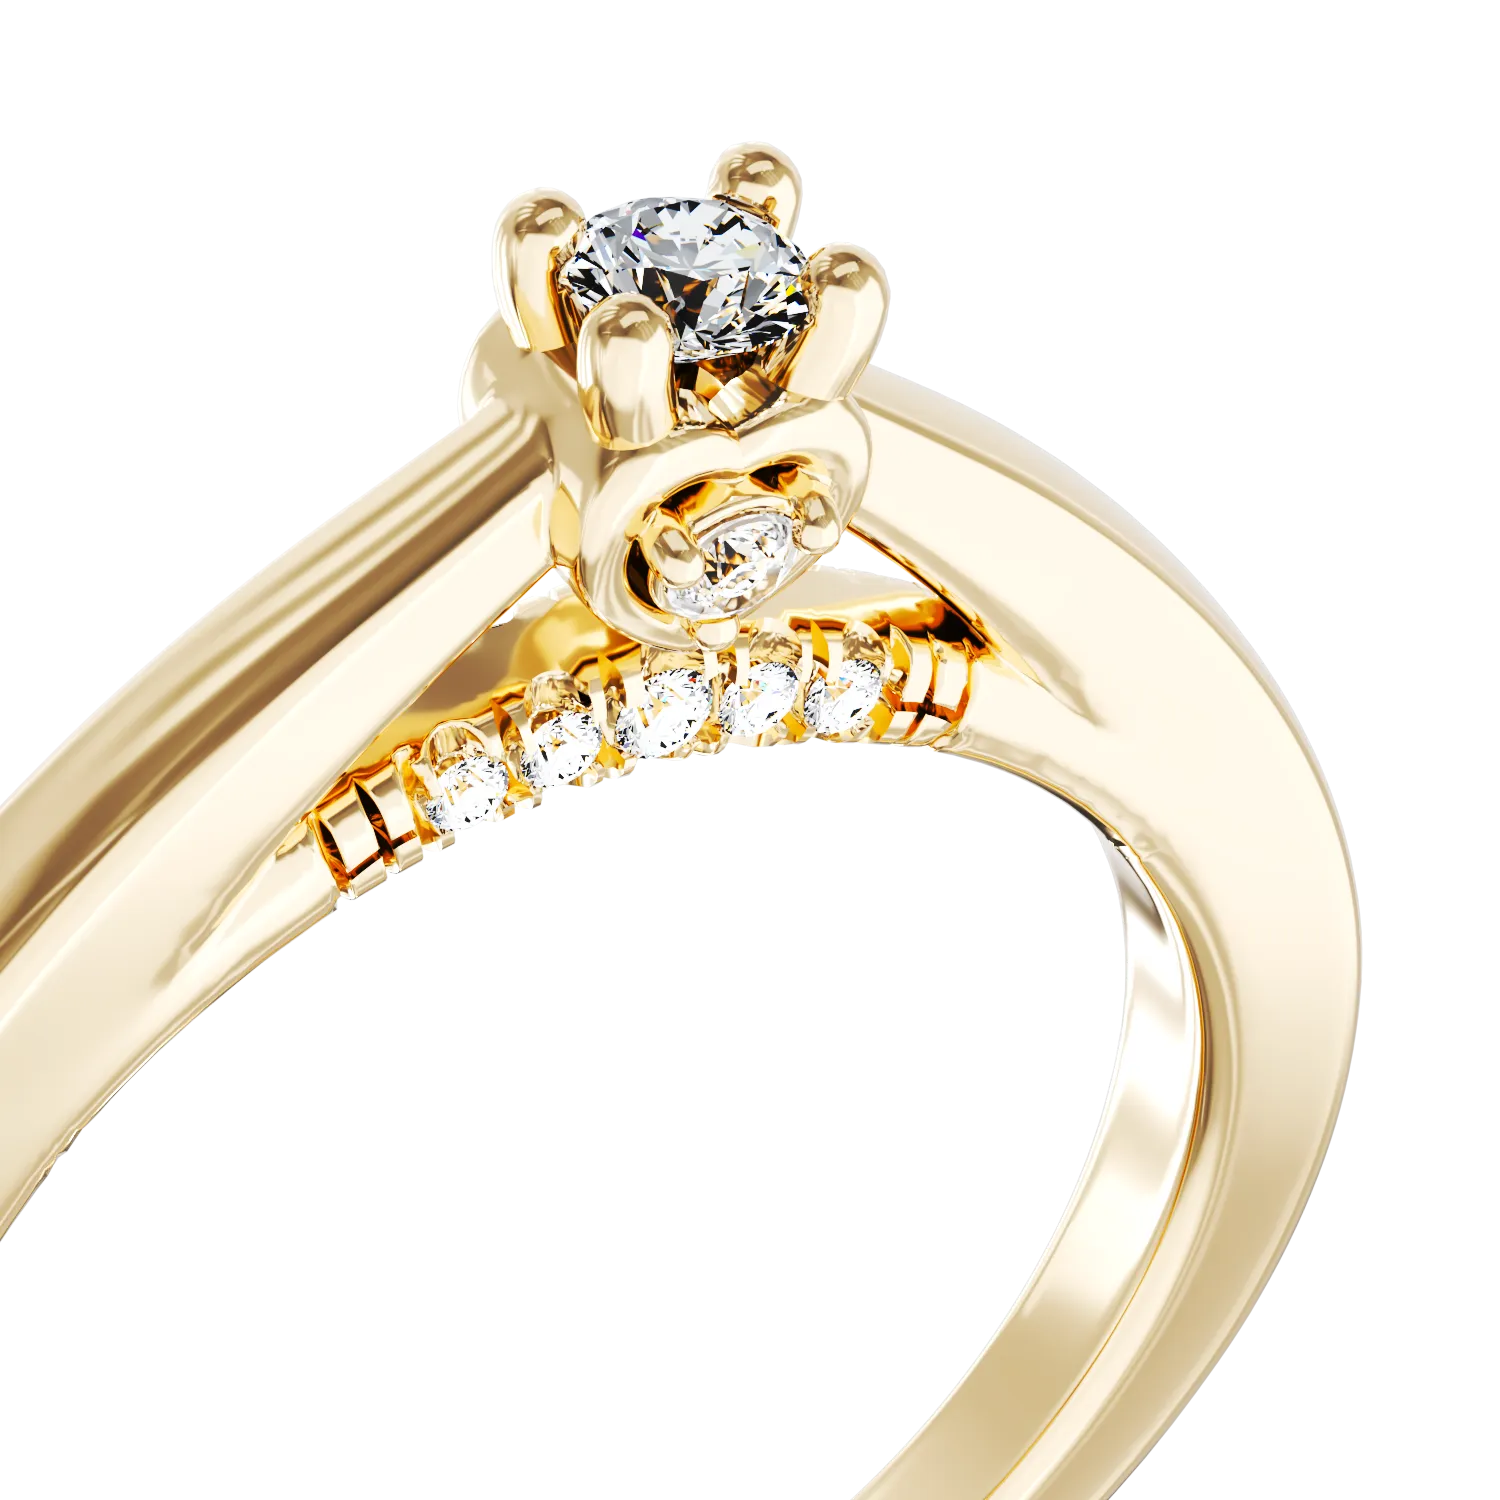 18K yellow gold engagement ring with 0.07ct diamond and 0.09ct diamonds